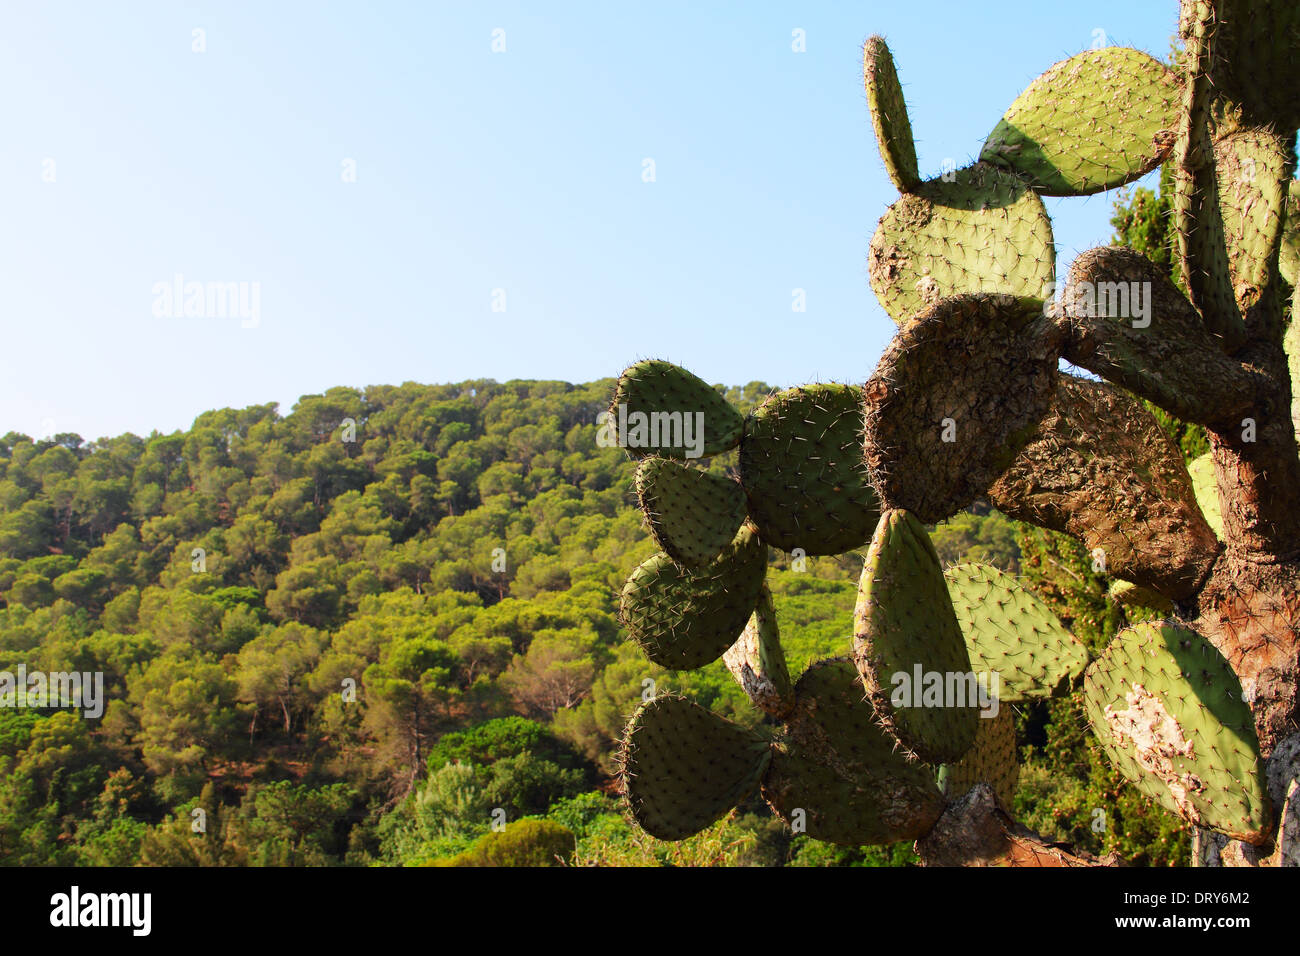 Landscape with cactus in Tenerife, Canary Islands, Spain Stock Photo